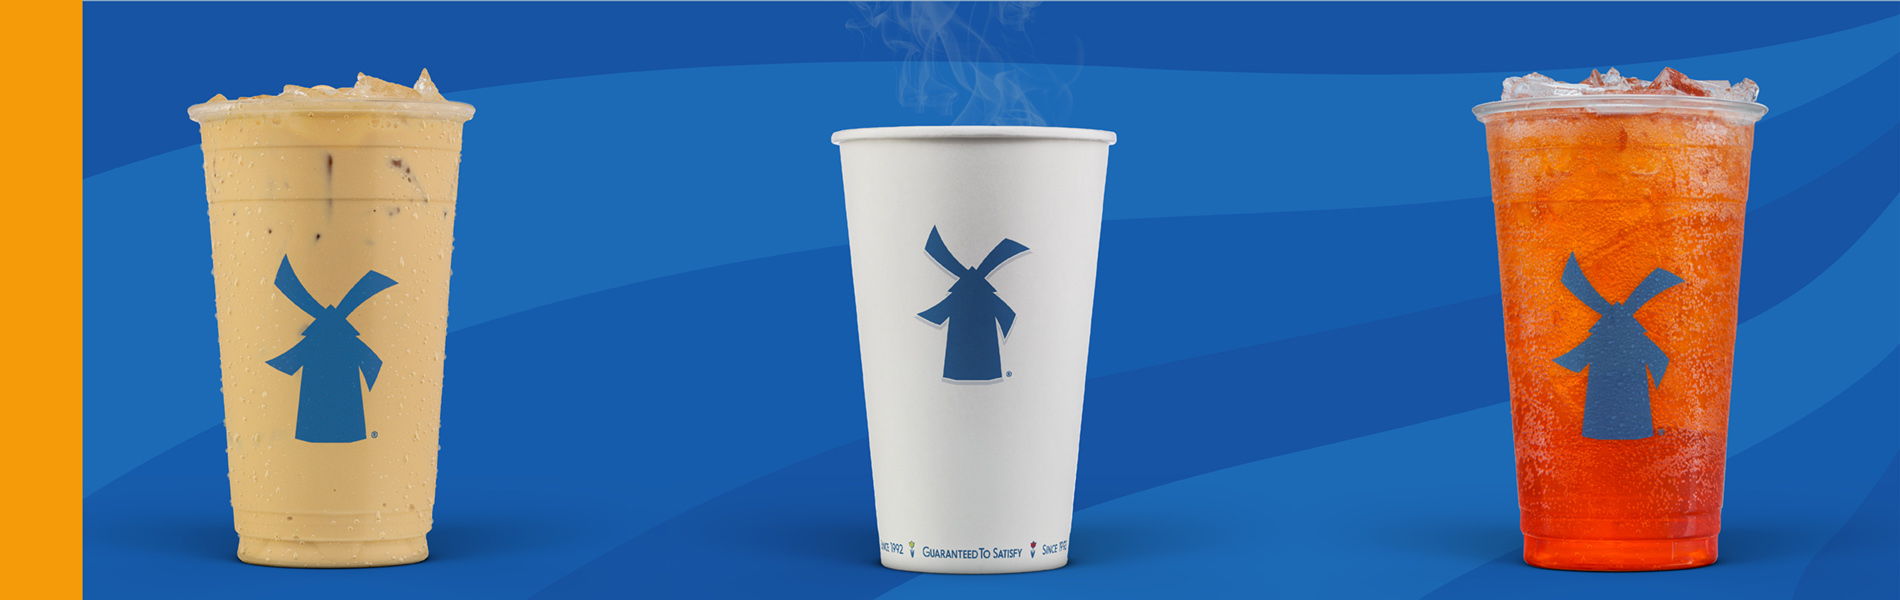 Dutch Bros cold coffee, hot coffee and tea on a blue banner